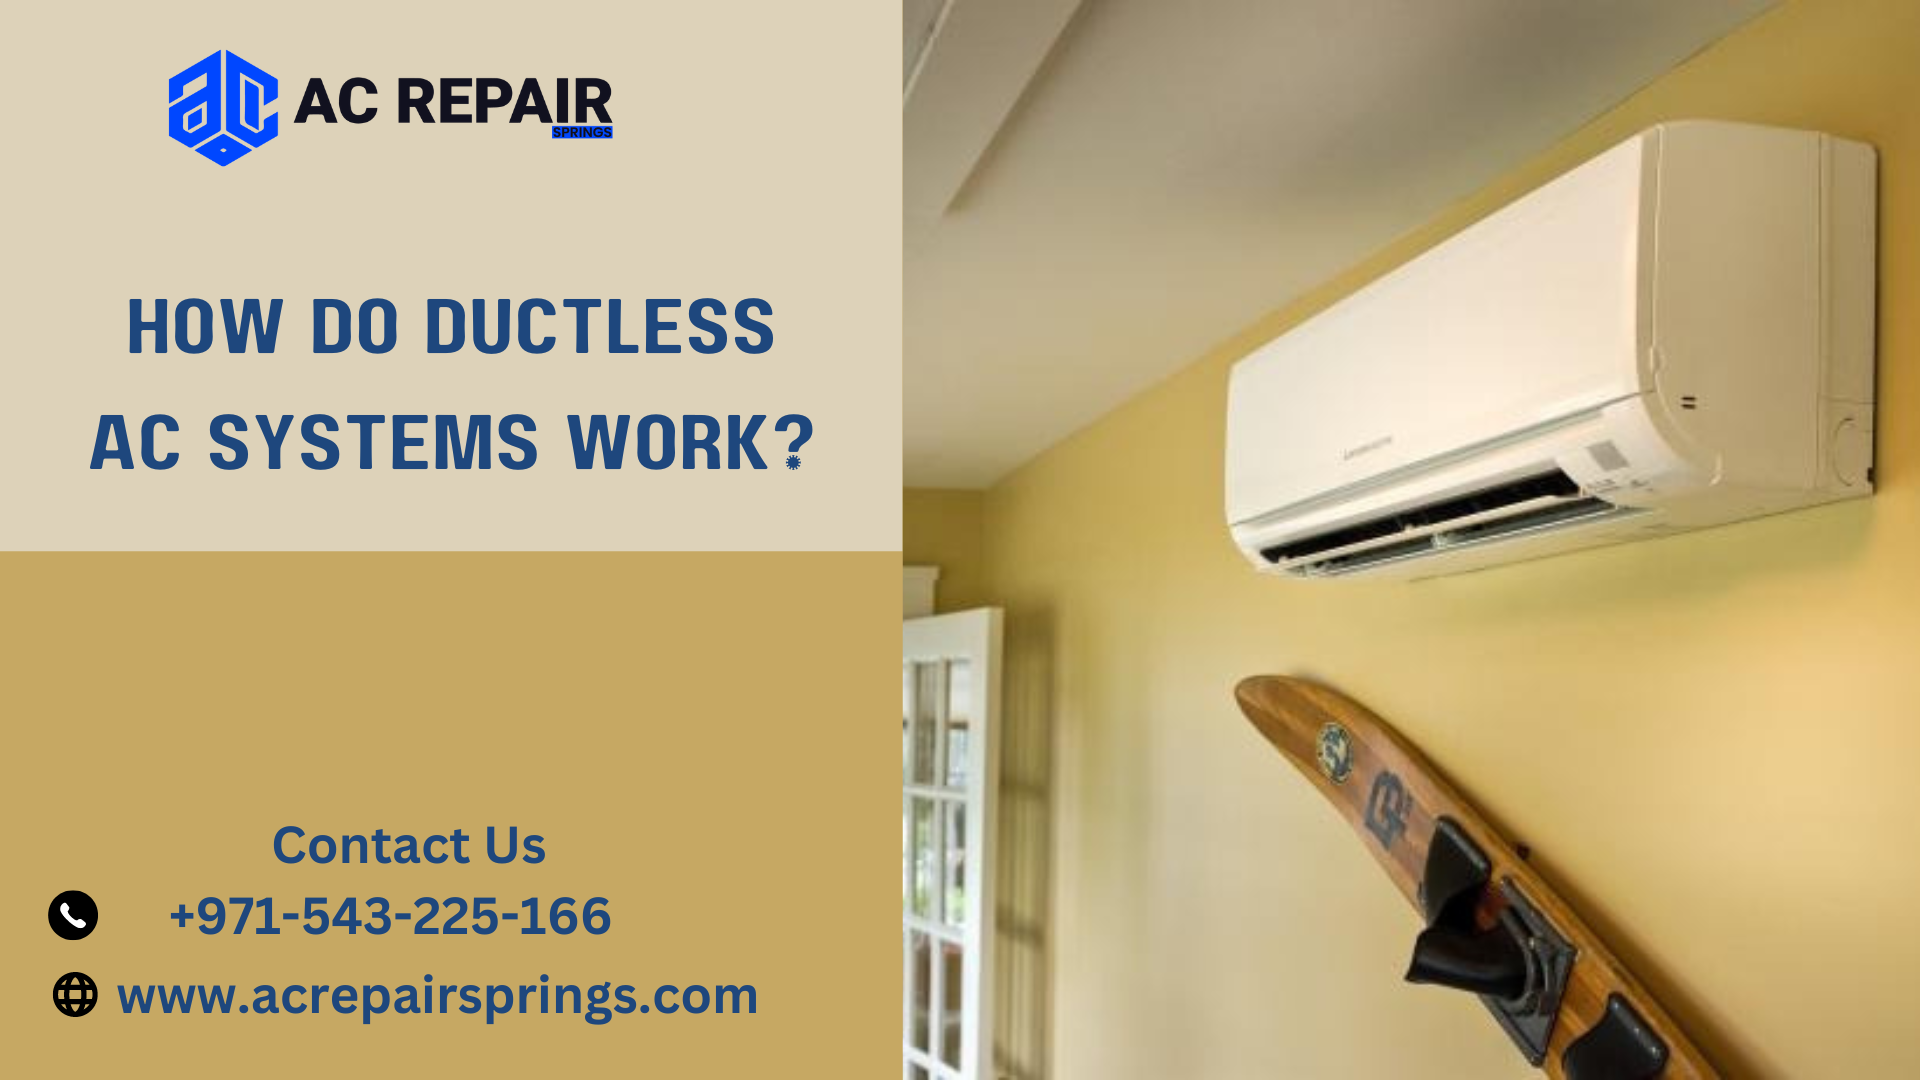 How do ductless AC systems work?